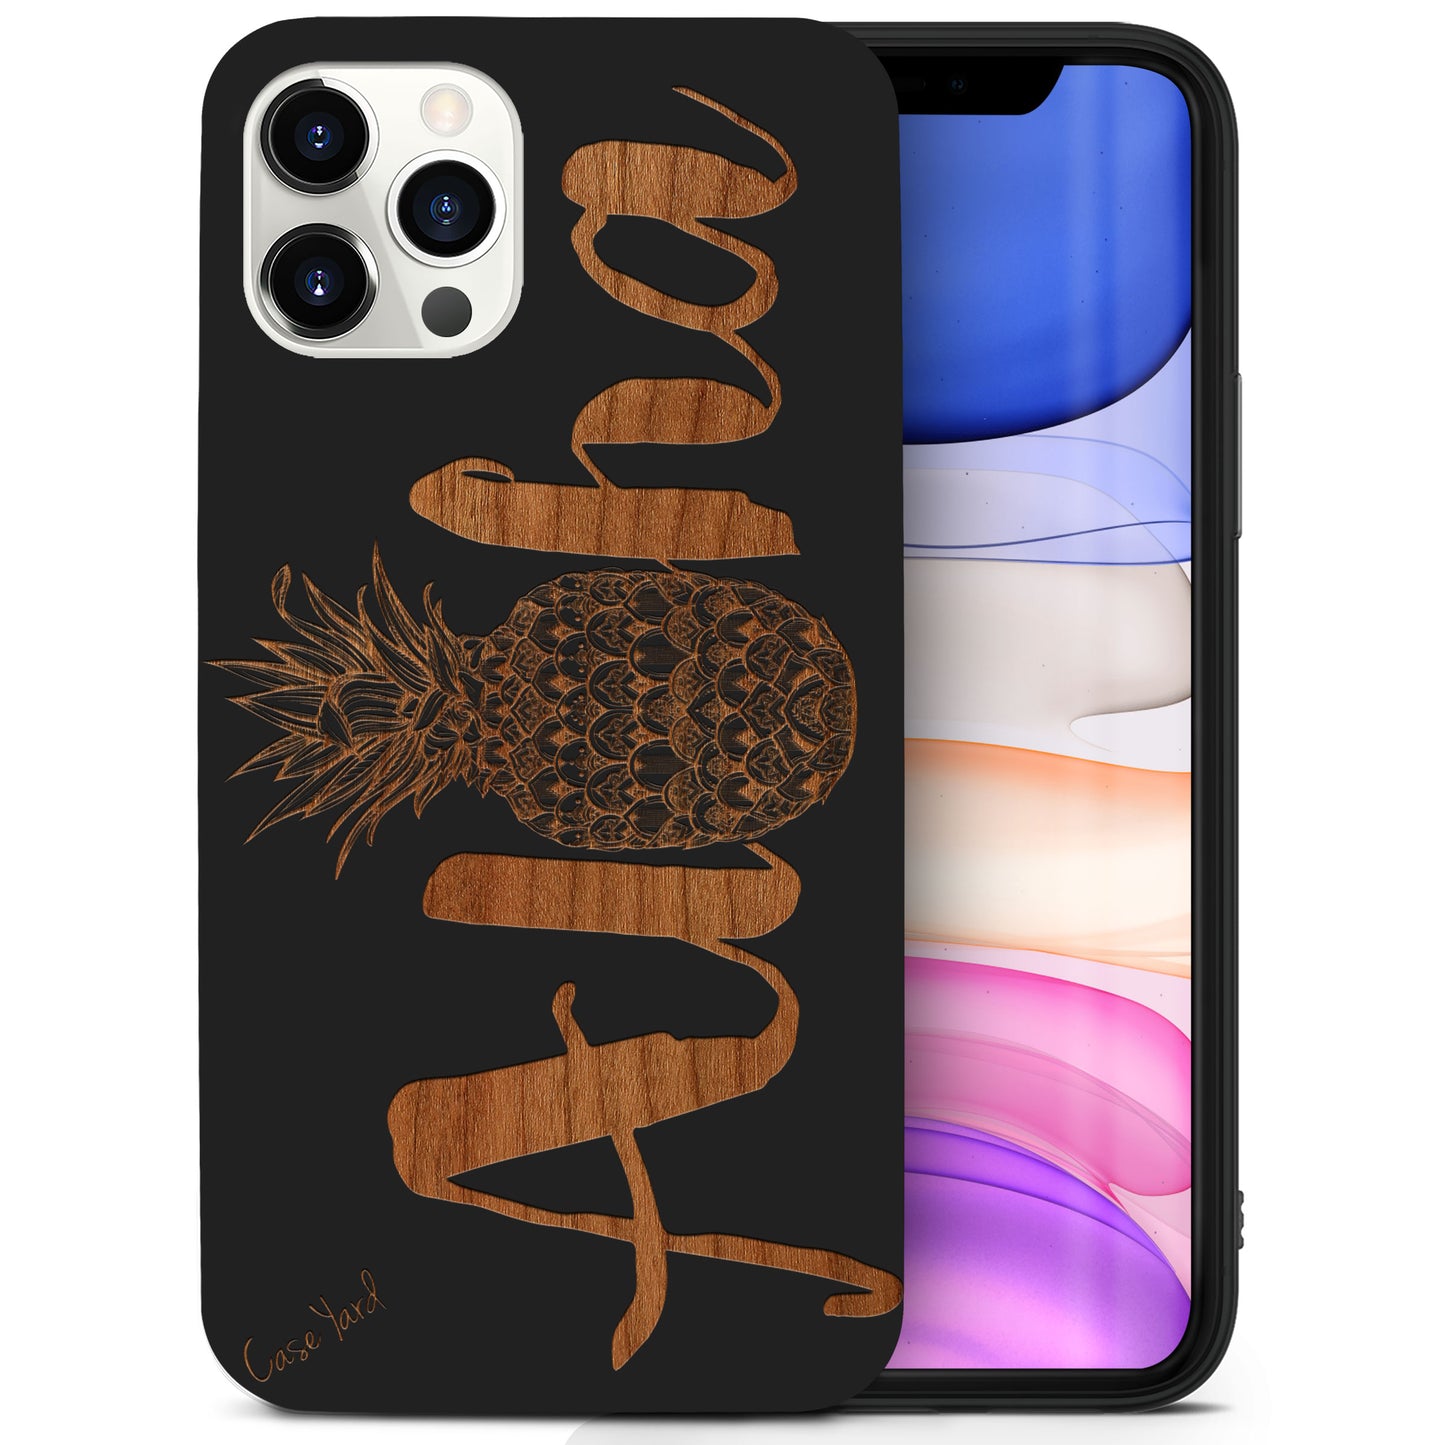 Wooden Cell Phone Case Cover, Laser Engraved case for iPhone & Samsung phone Aloha Pineapple Design